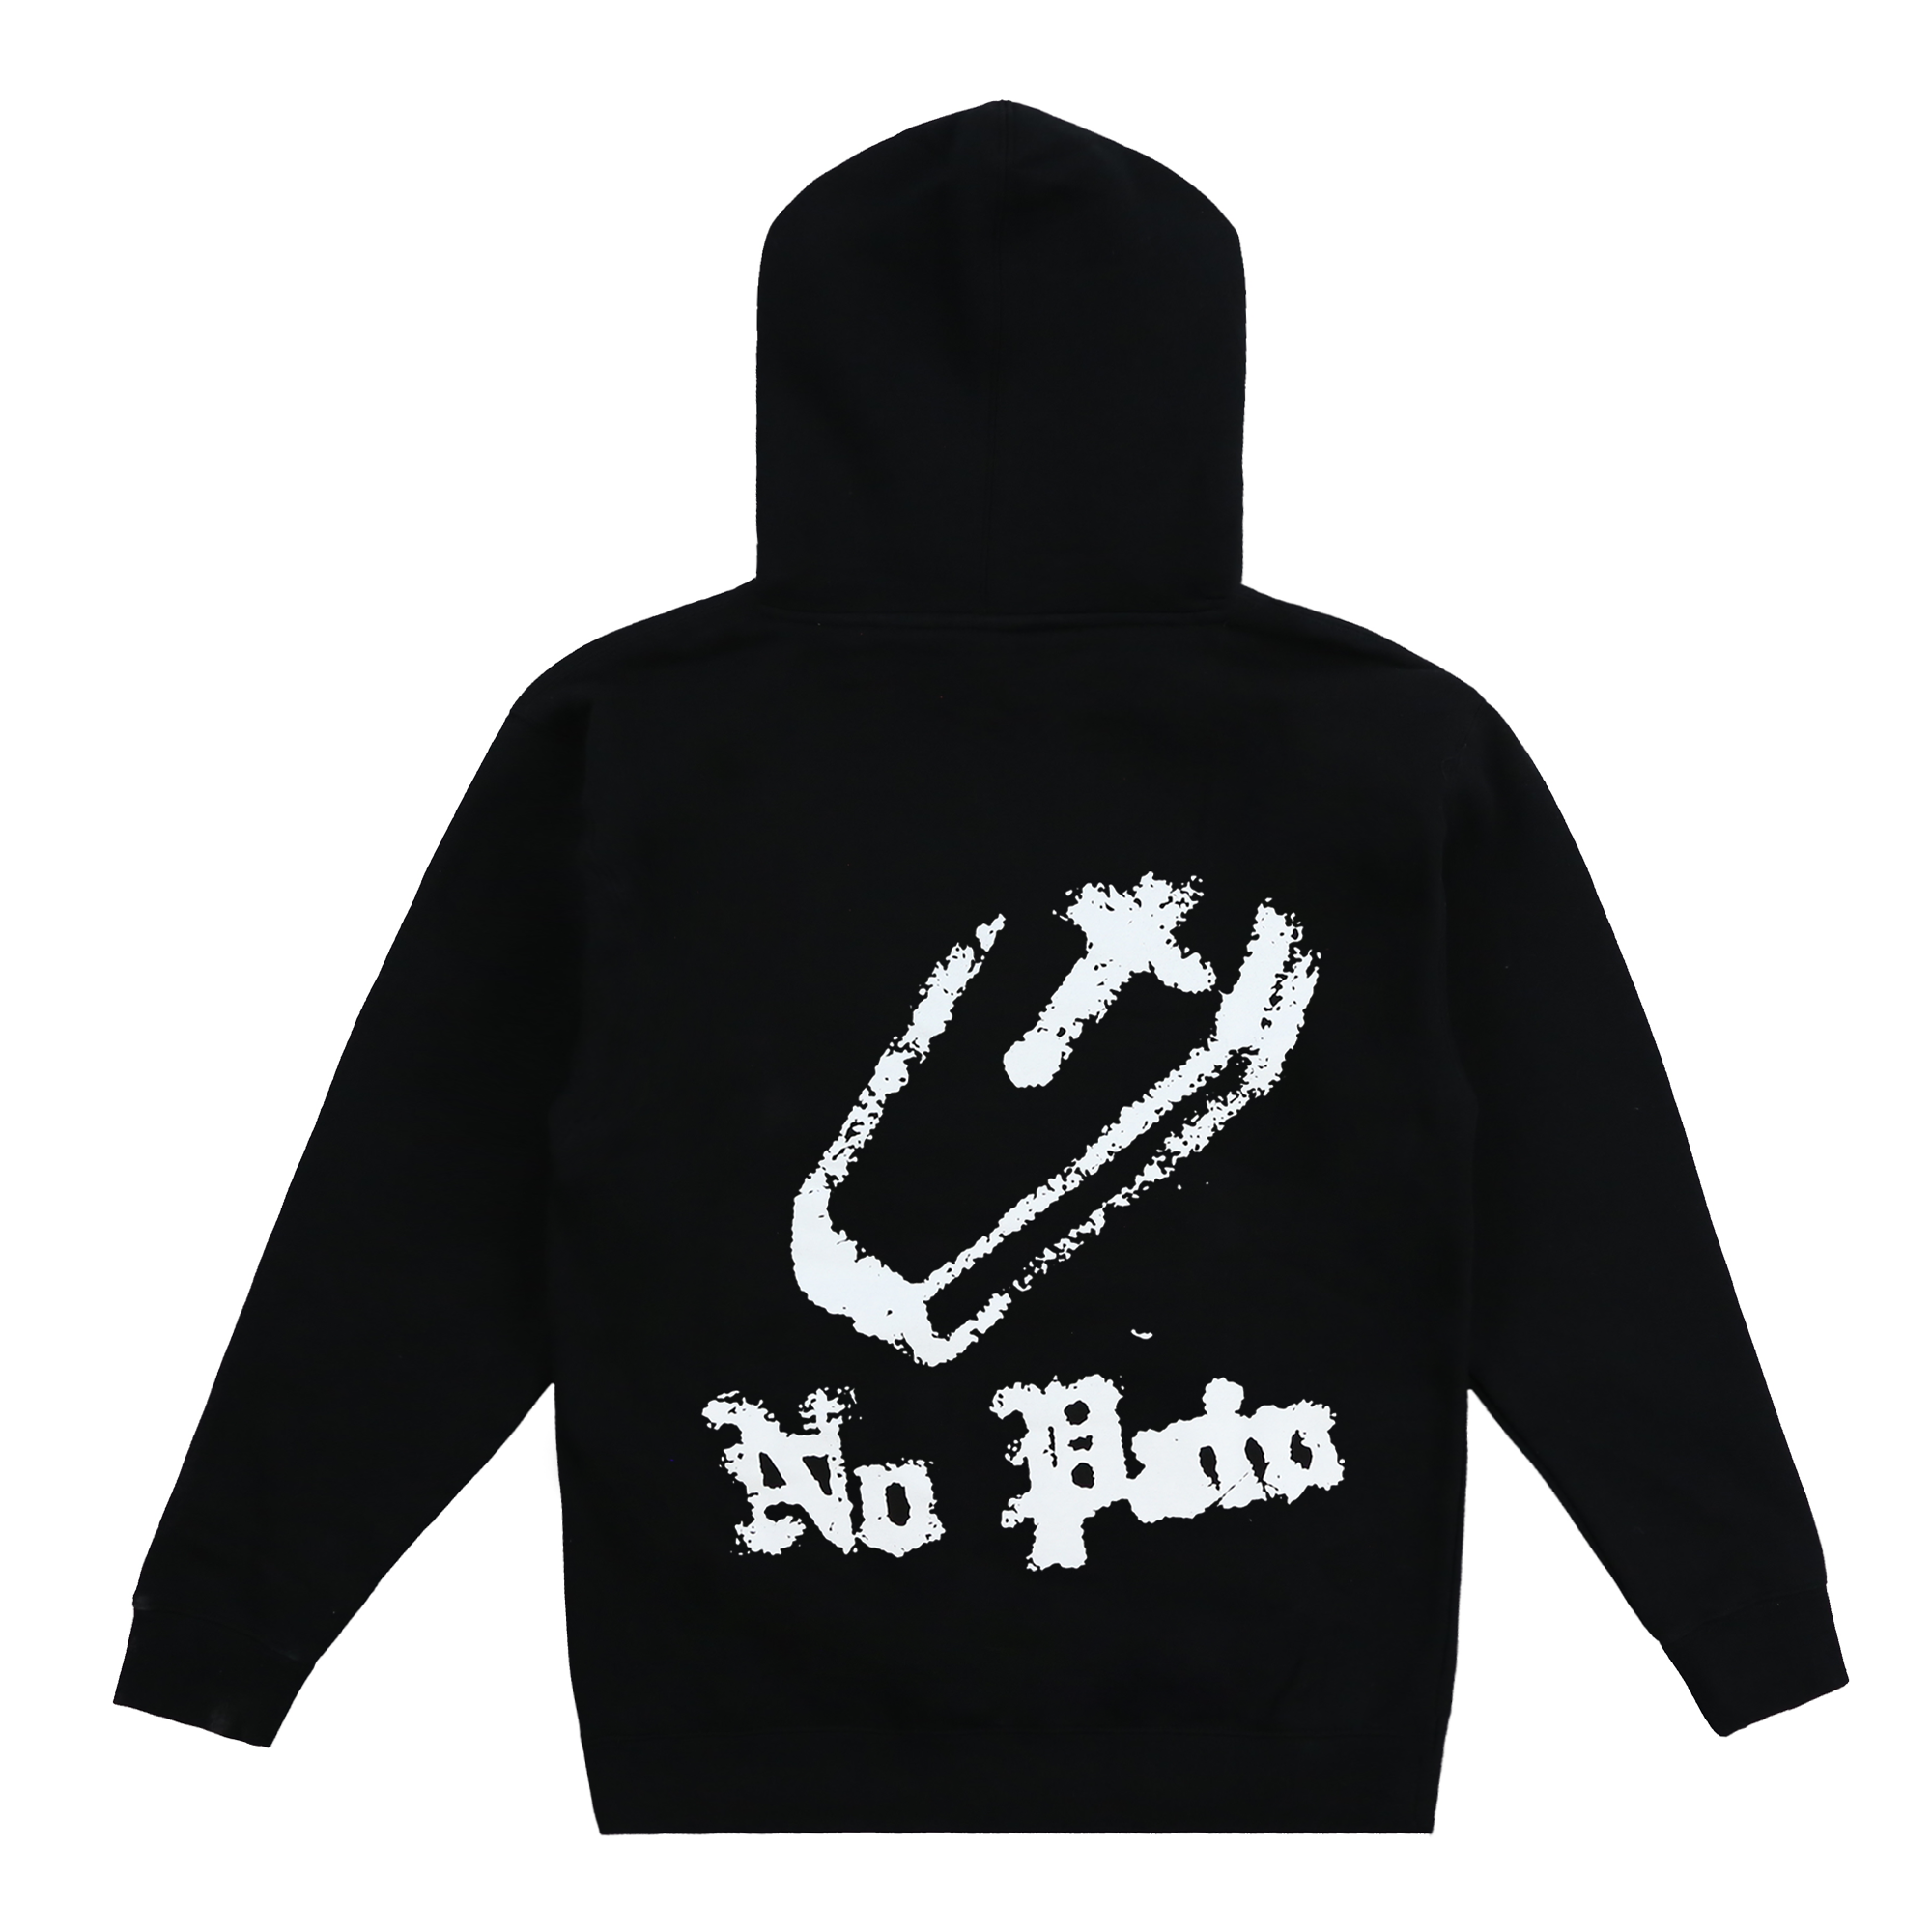 NO PAIN PULLOVER HOODIE